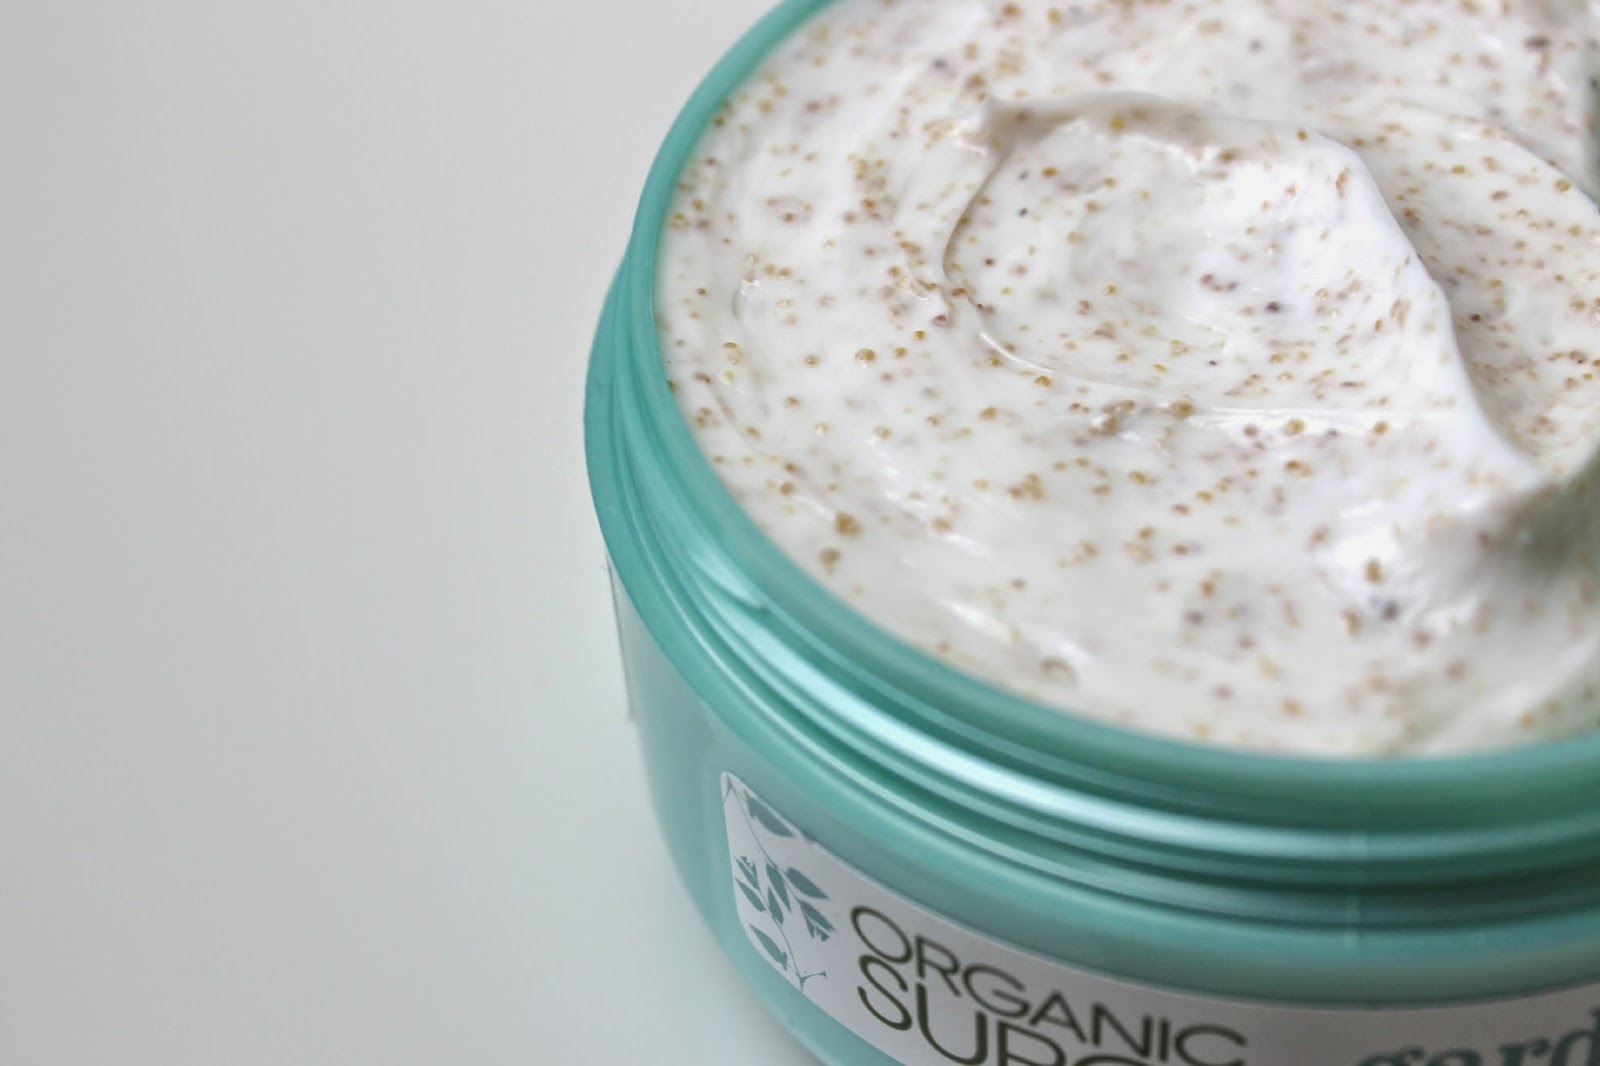 A picture of Organic Surge Gardeners Hand Scrub